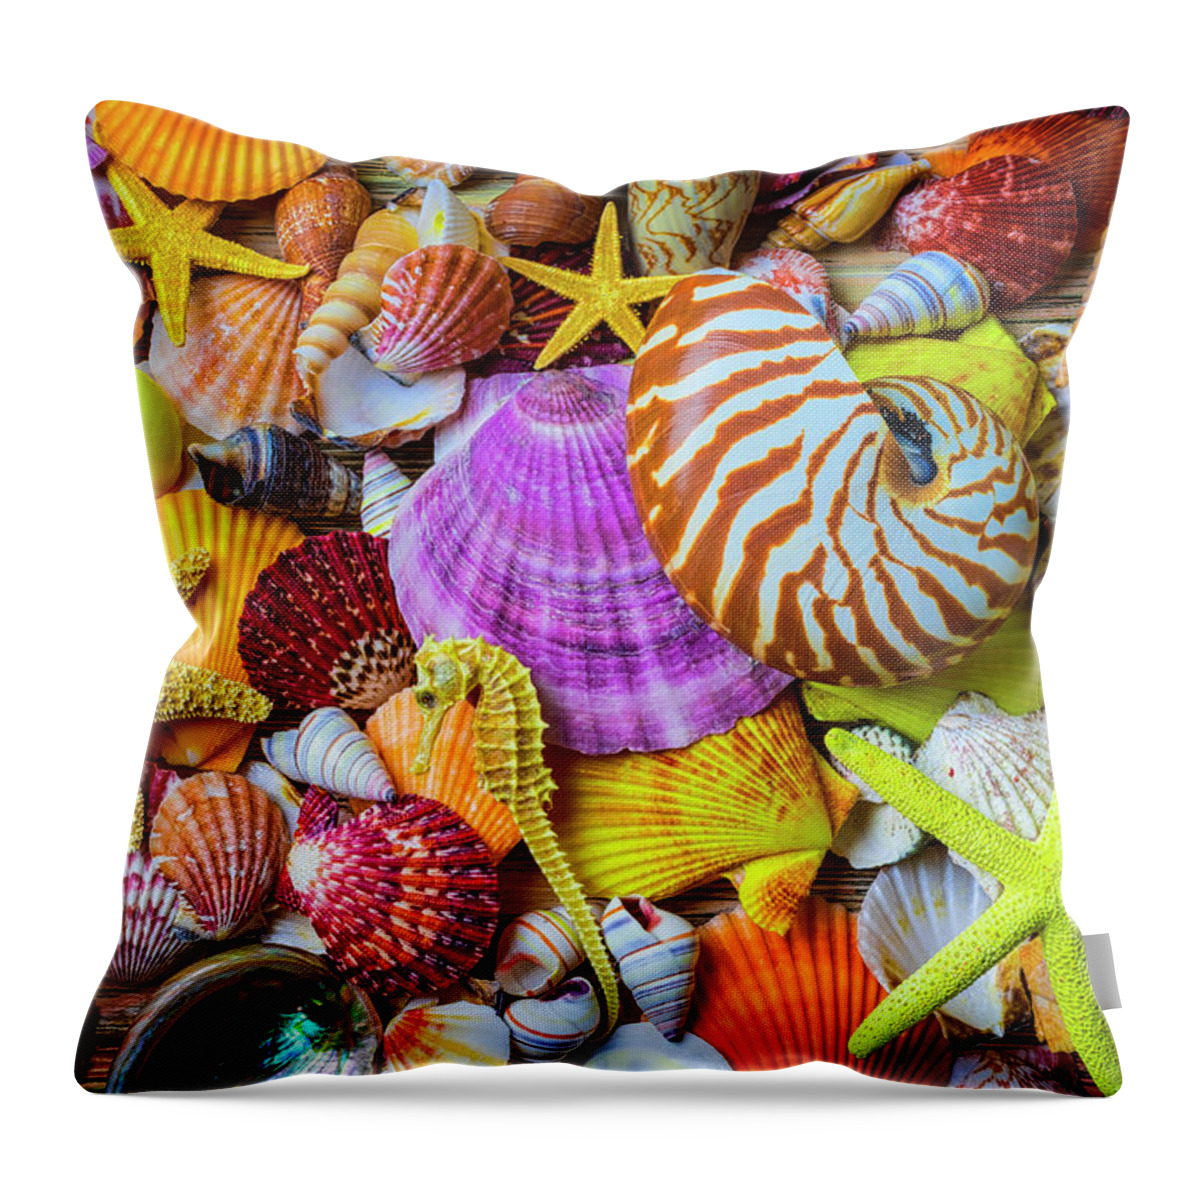 Exotic Throw Pillow featuring the photograph Assortment of Beautiful Seashells by Garry Gay